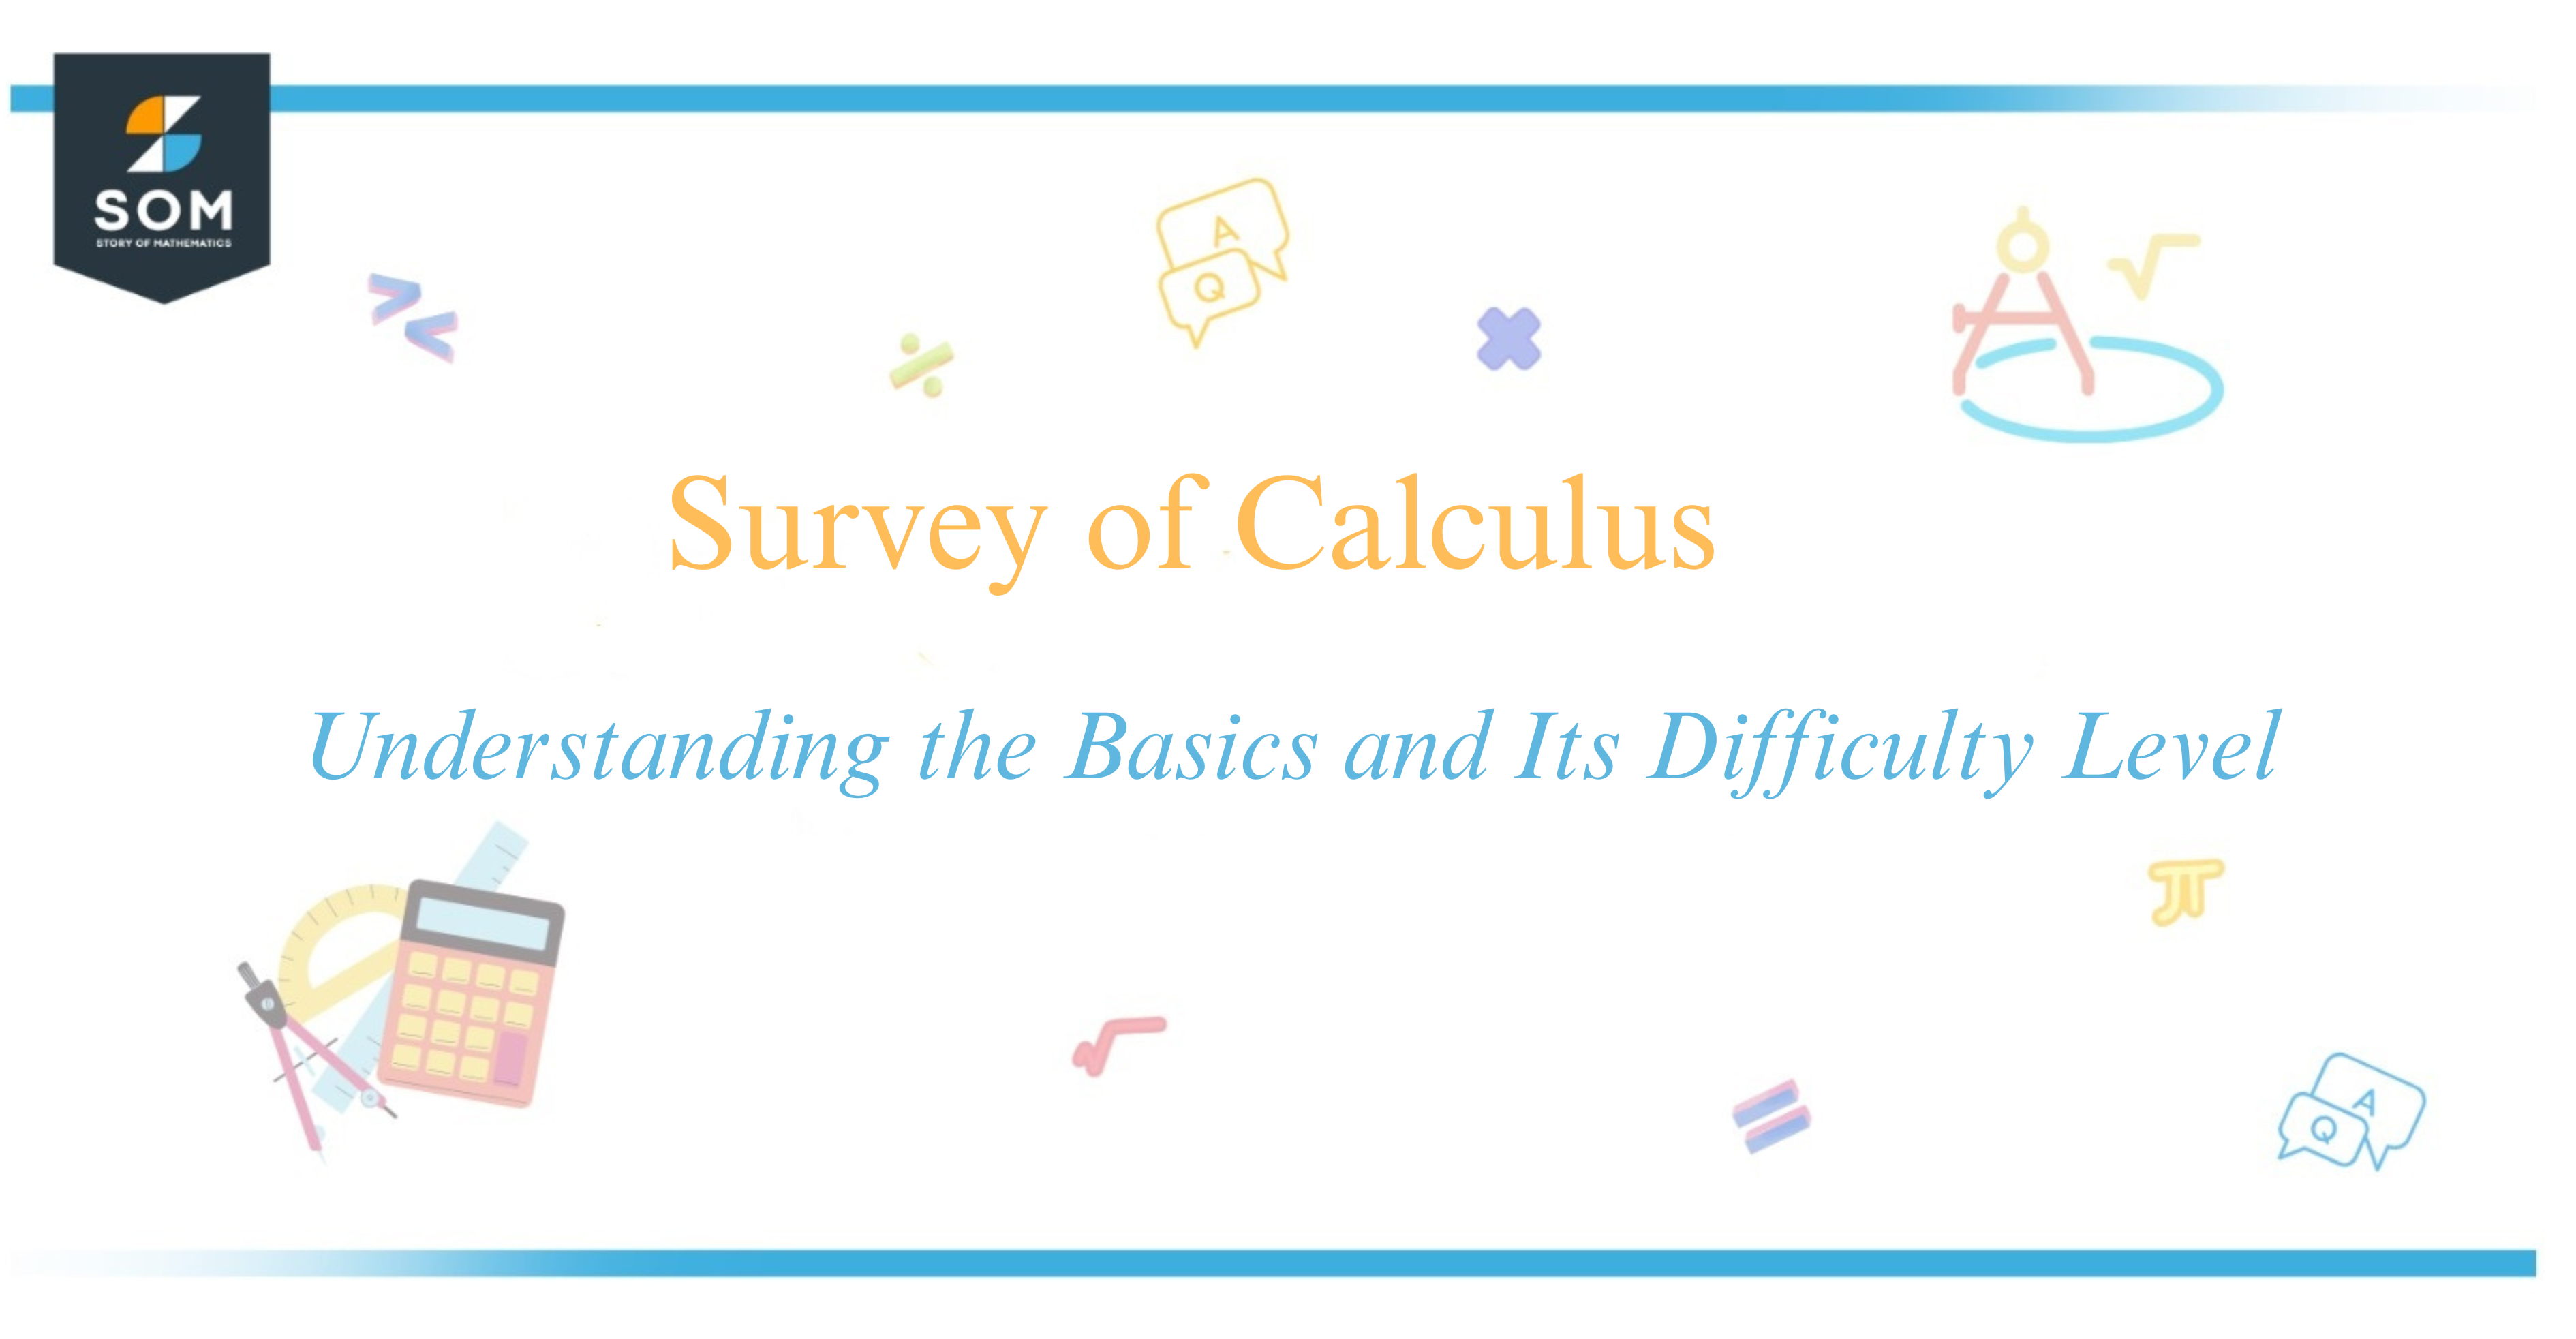 Survey of Calculus Understanding the Basics and Its Difficulty Level